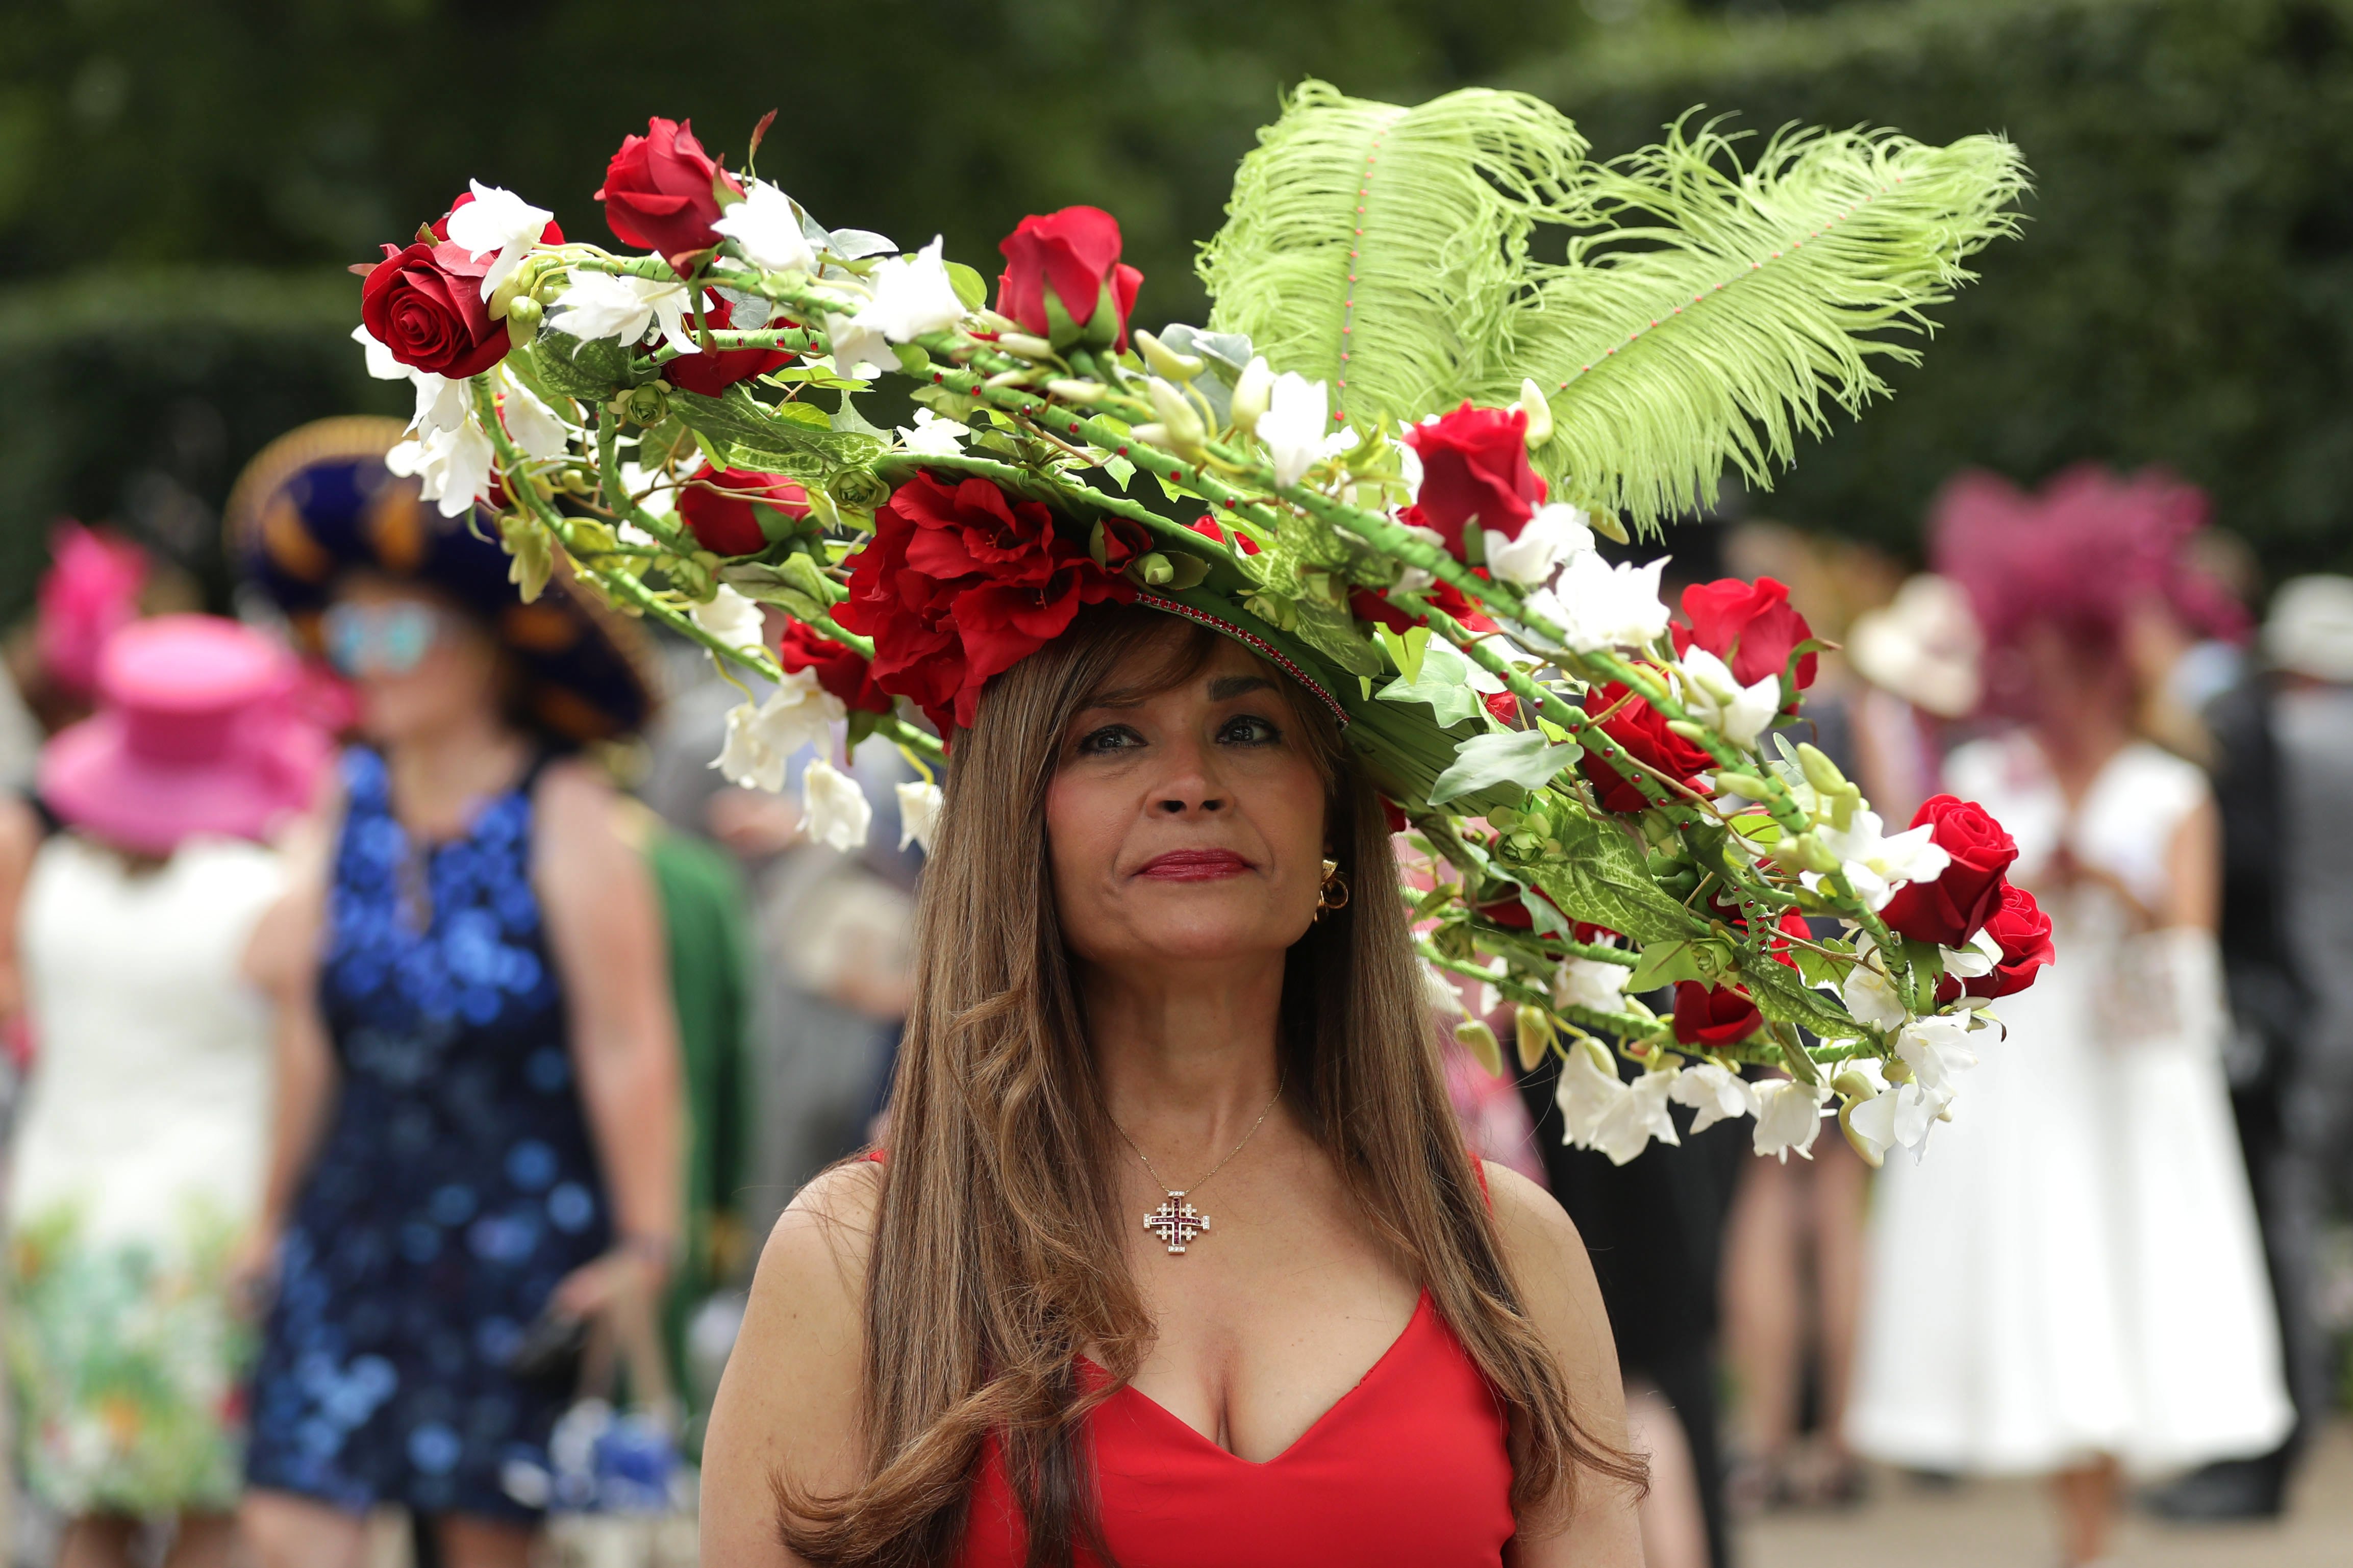 ascot hats 19 pictures of ridiculous hats from royal ascot 2017 FPAXCSZ